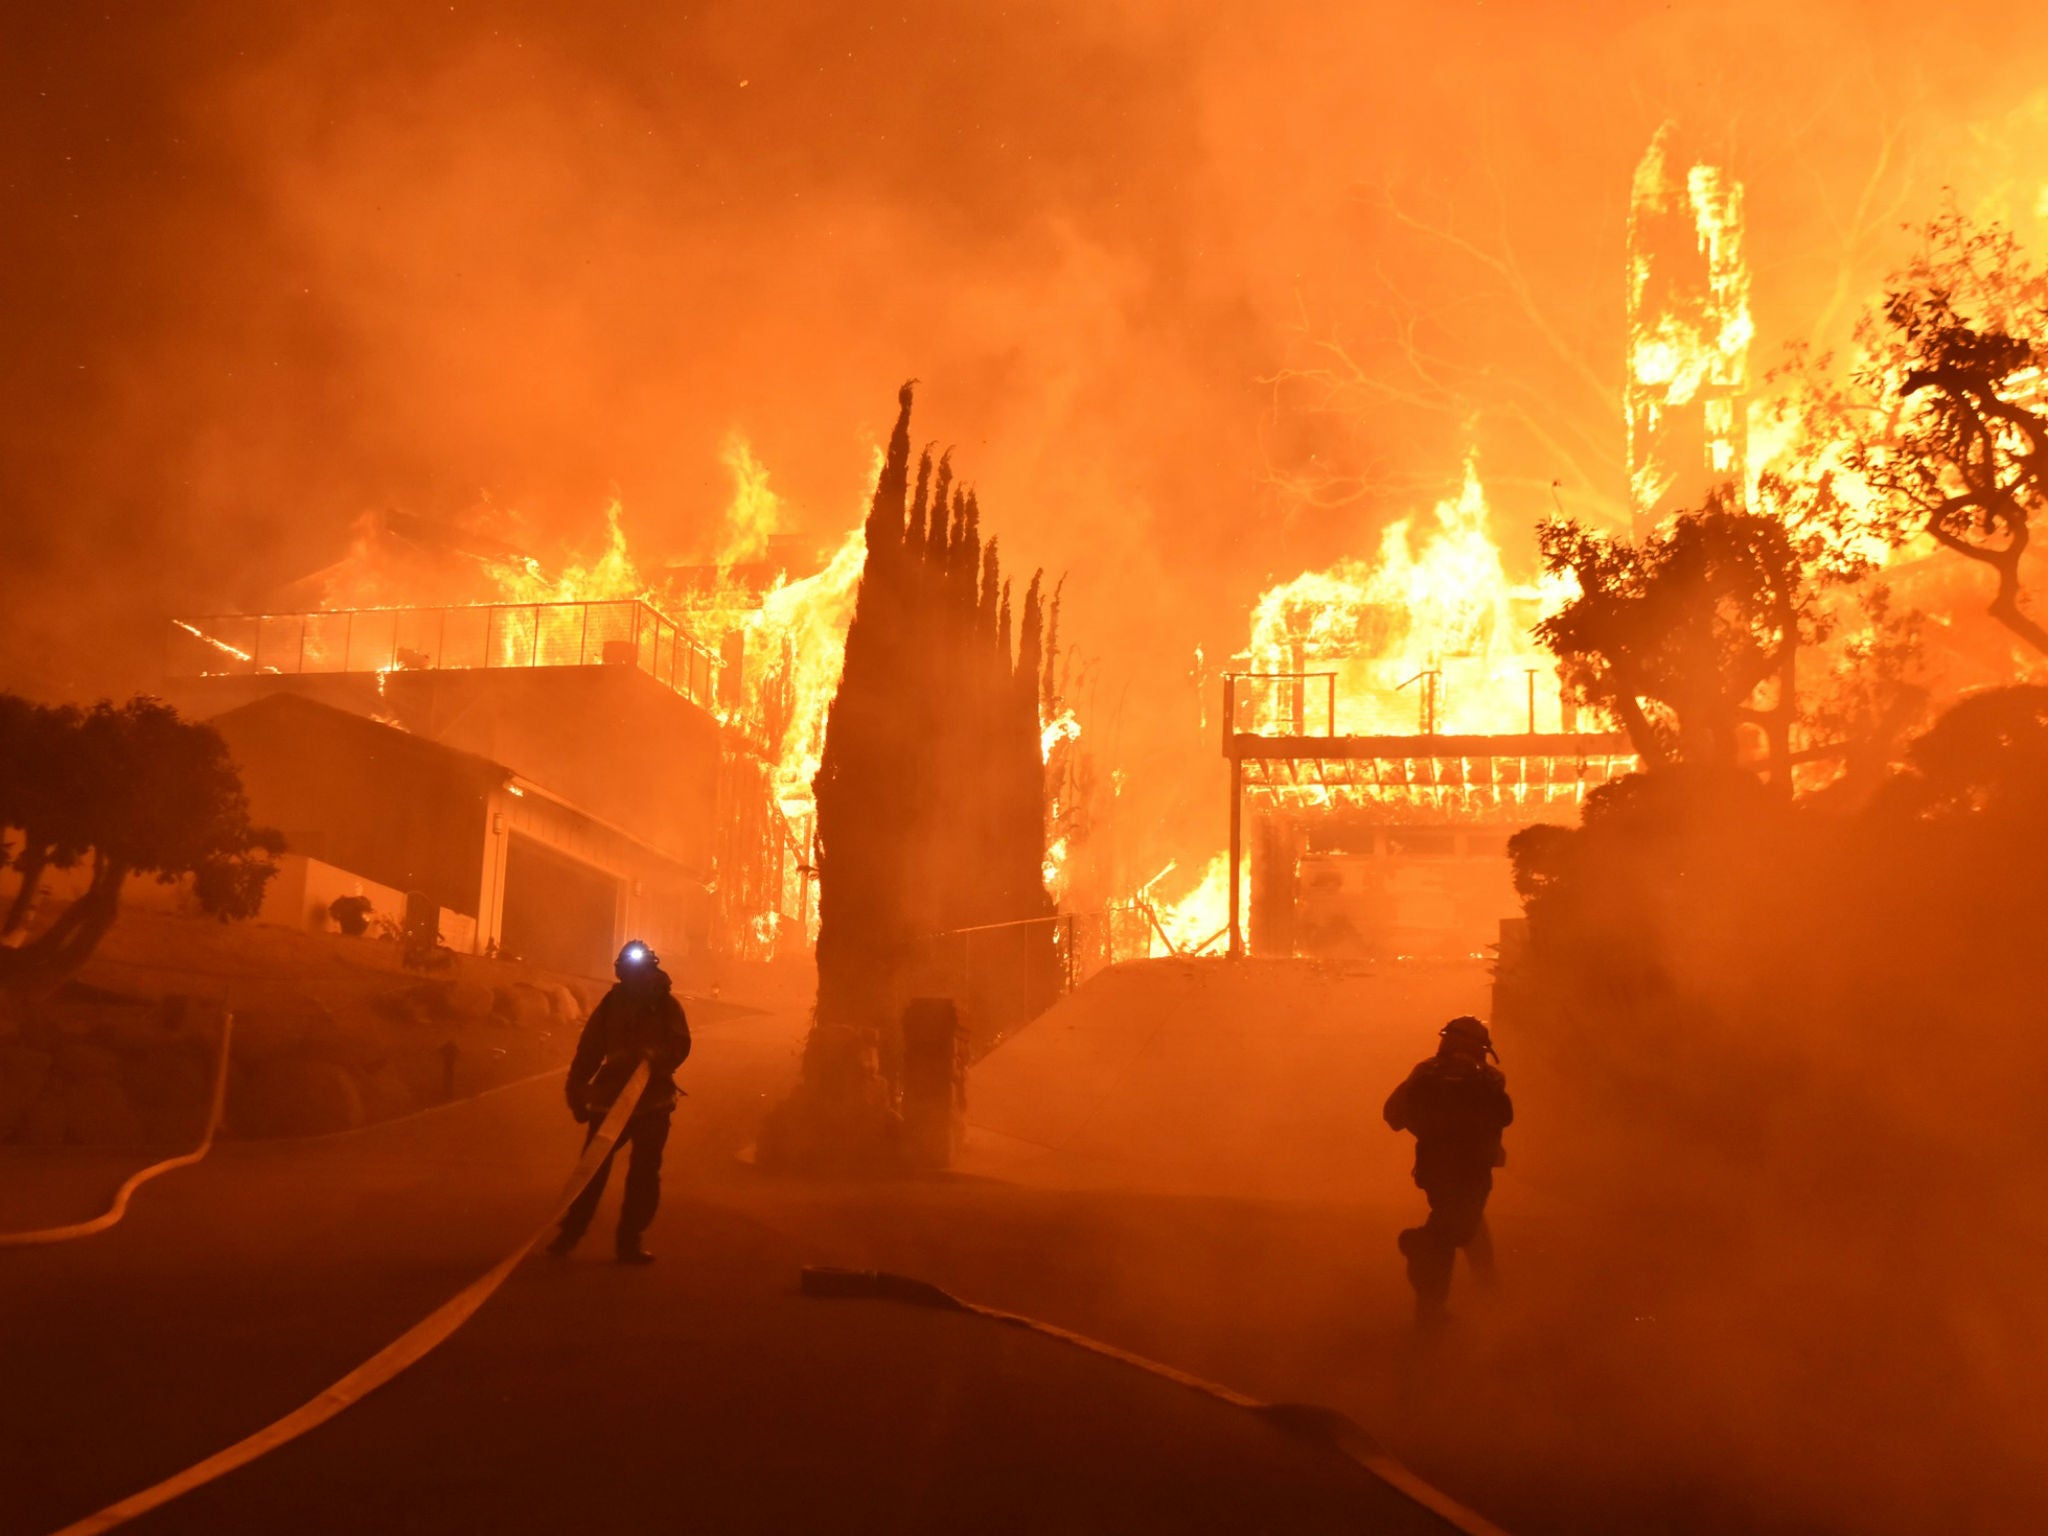 Firefighters work to put out a blaze burning homes in Ventura, California